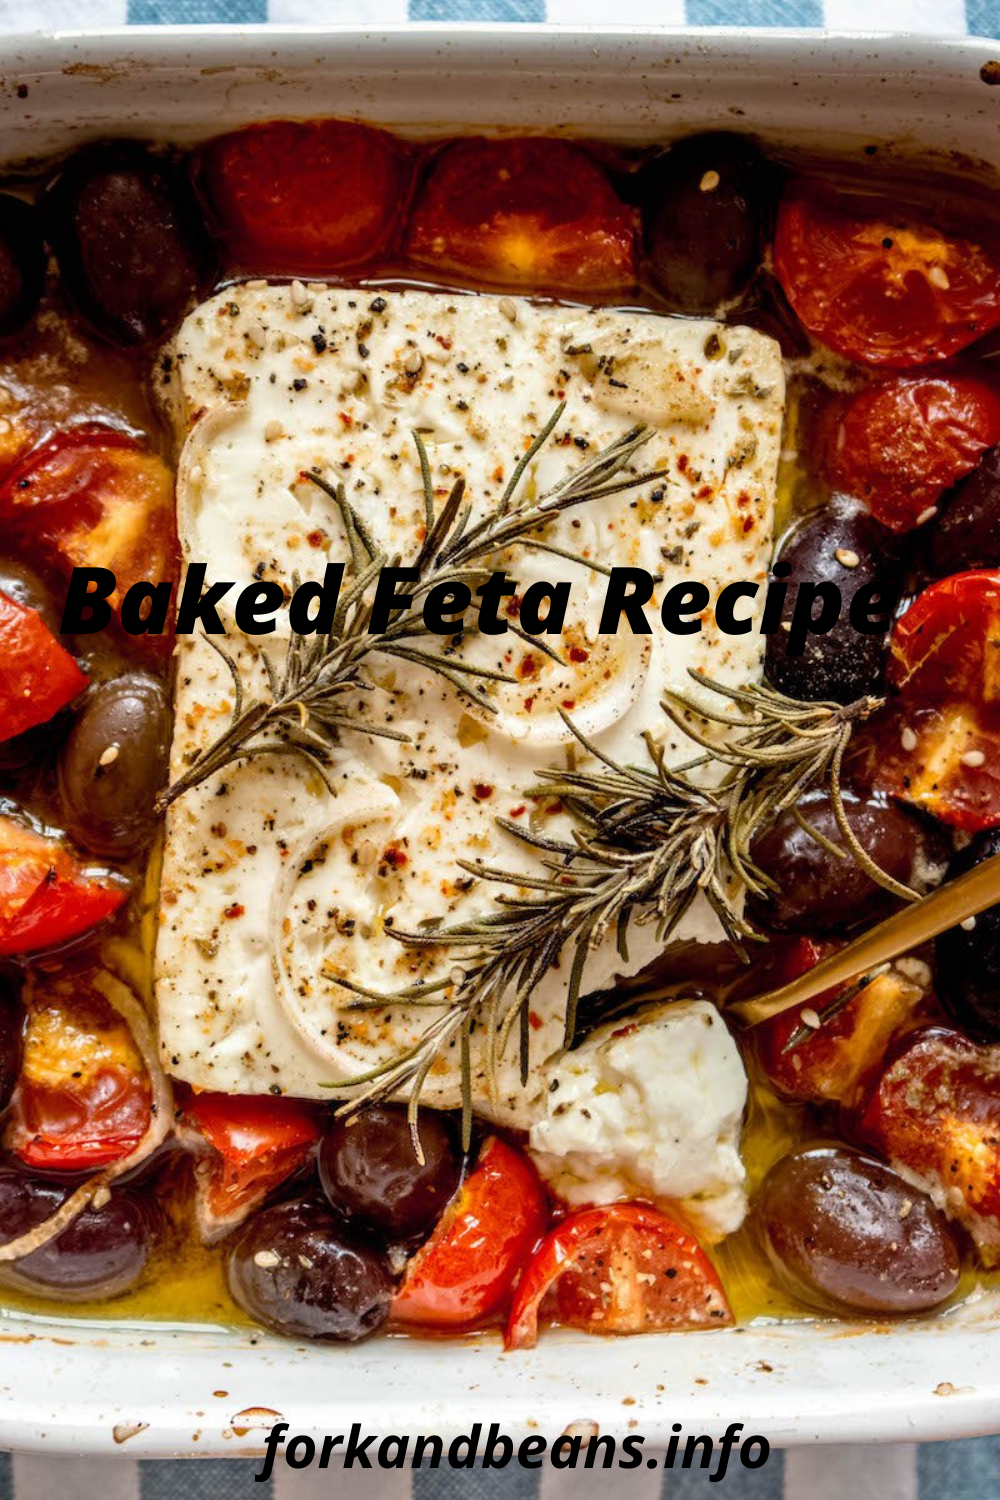 BAKED FETA CHEESE WITH TOMATOES